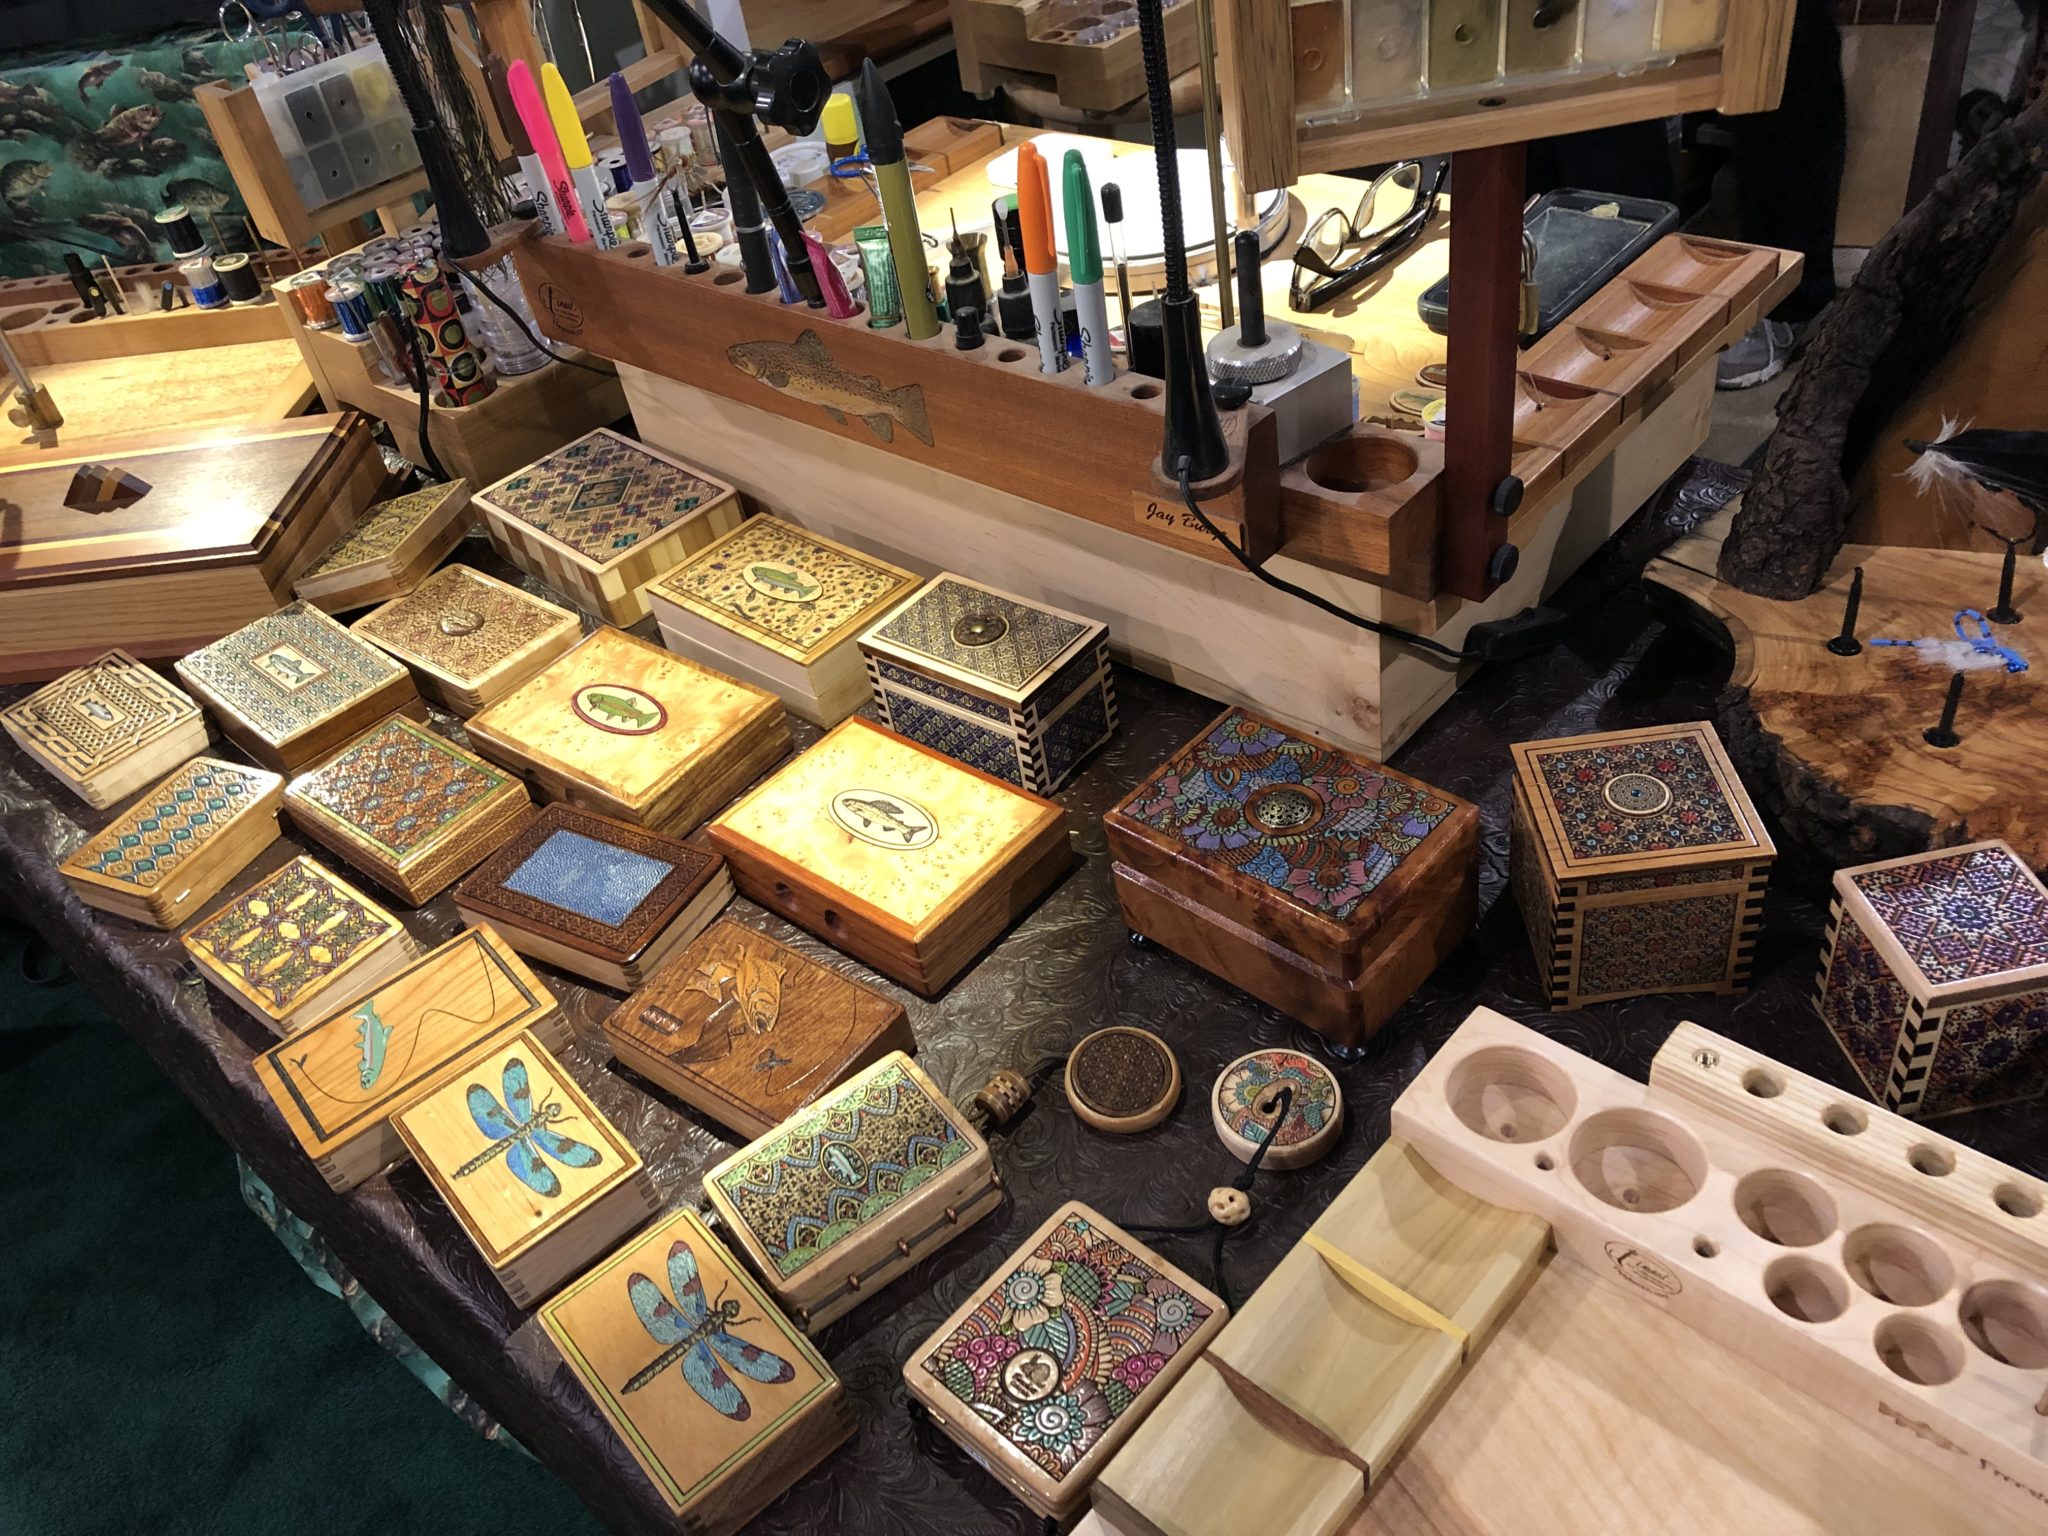 Wooden Tenkara Boxes at the Fly Fishing Show